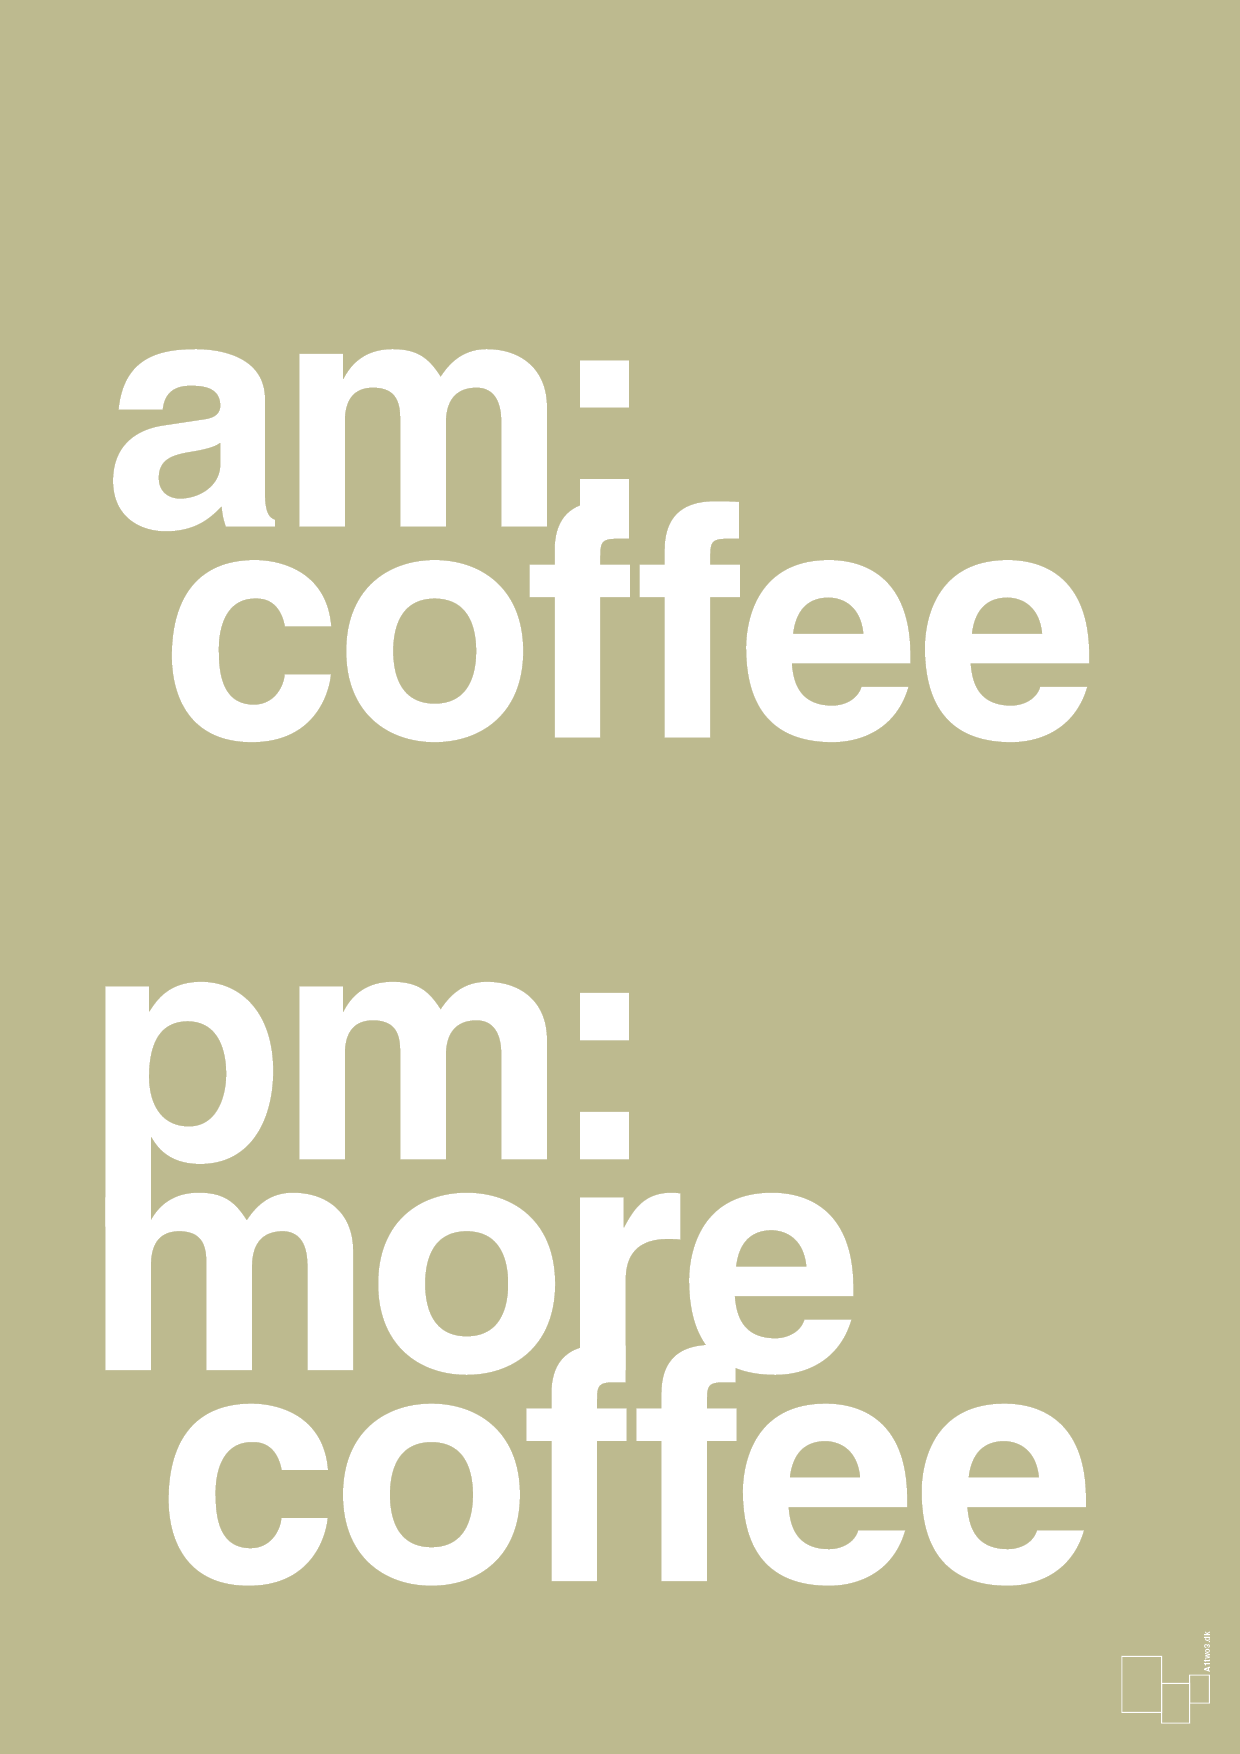 am coffee pm more coffee - Plakat med Ordsprog i Back to Nature